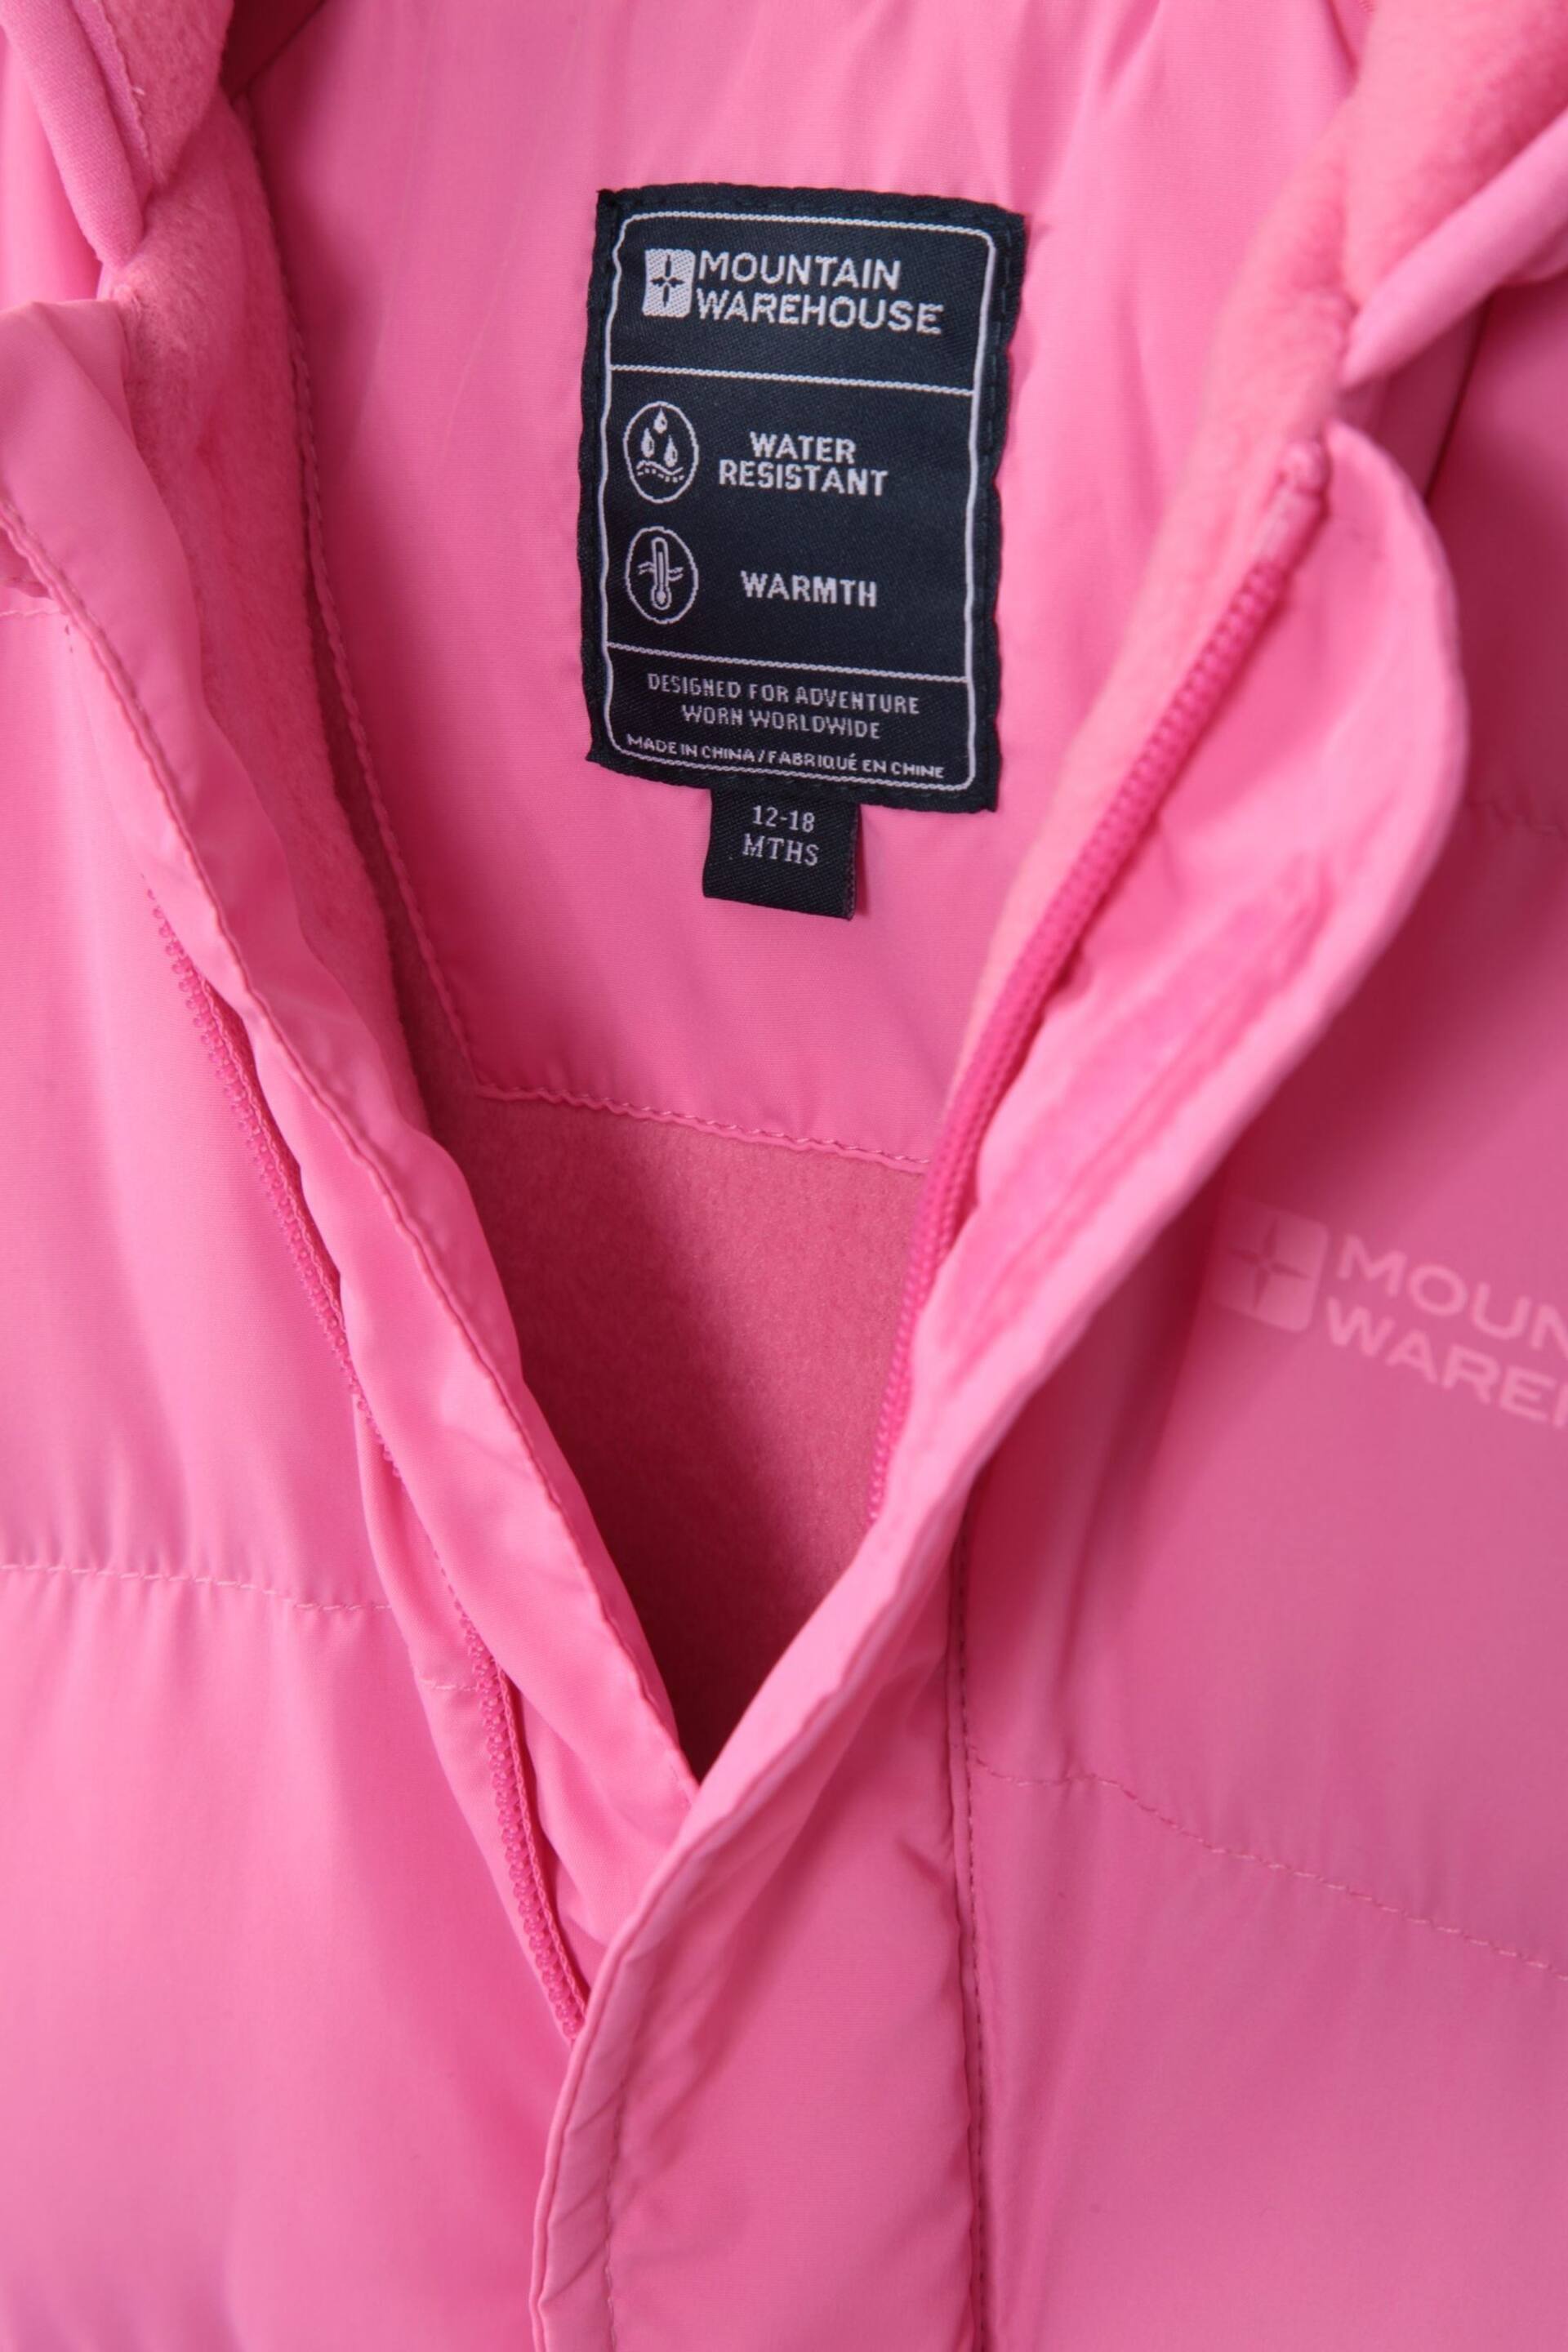 Mountain Warehouse Pink Frosty Toddler Fleece Lined Padded Suit - Image 4 of 4